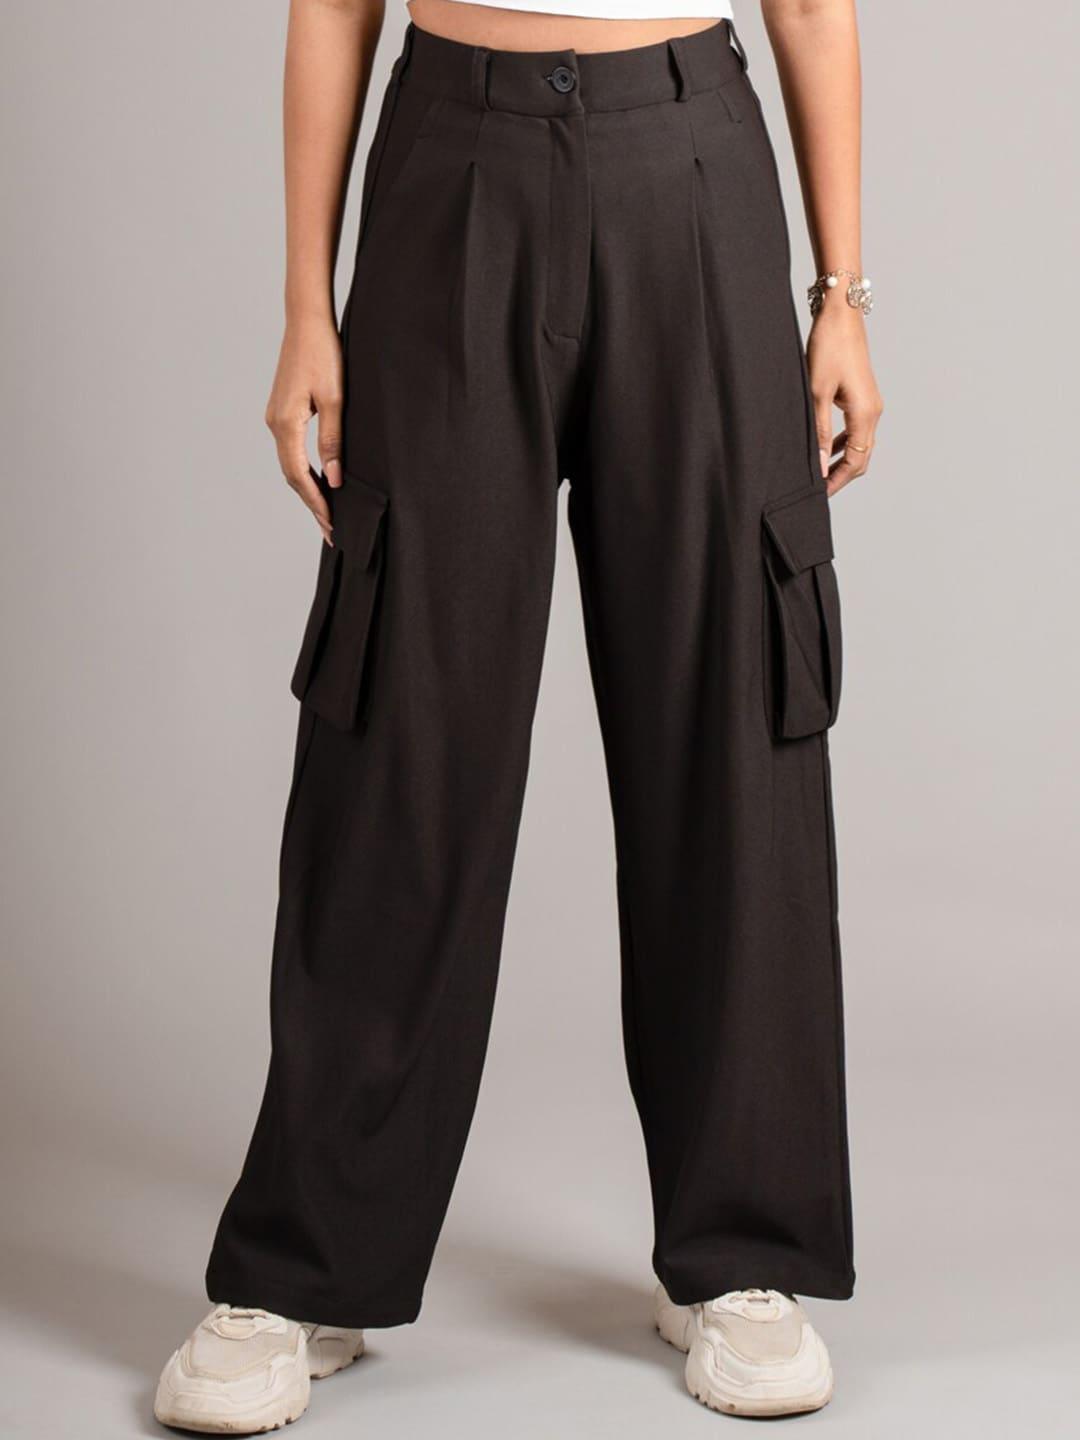 dressberry women black high-rise pleated cargos trousers